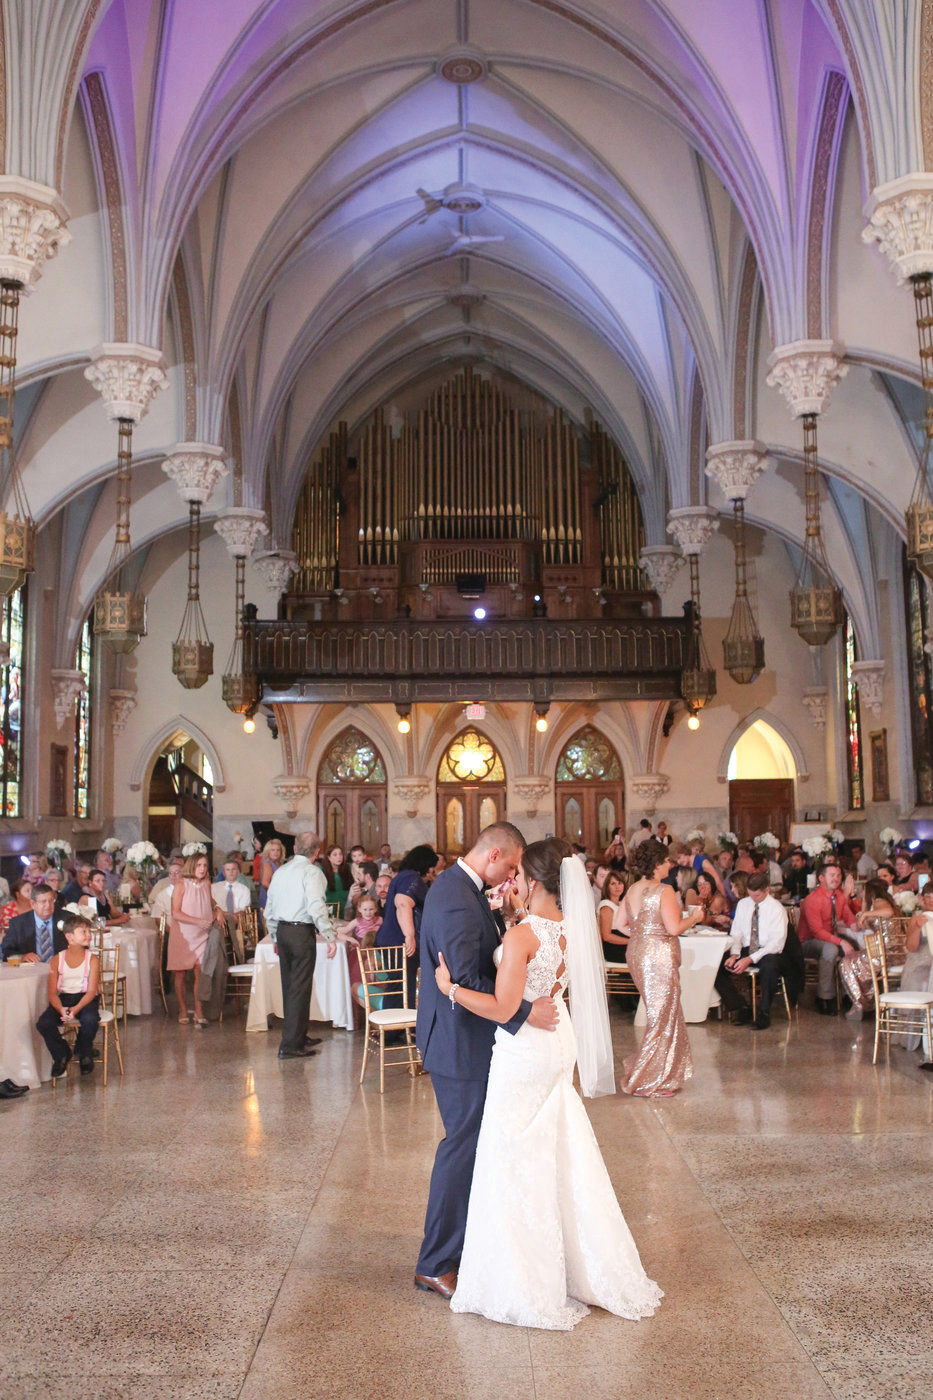 Top Wedding Venues Johnstown Pa in the world Check it out now 